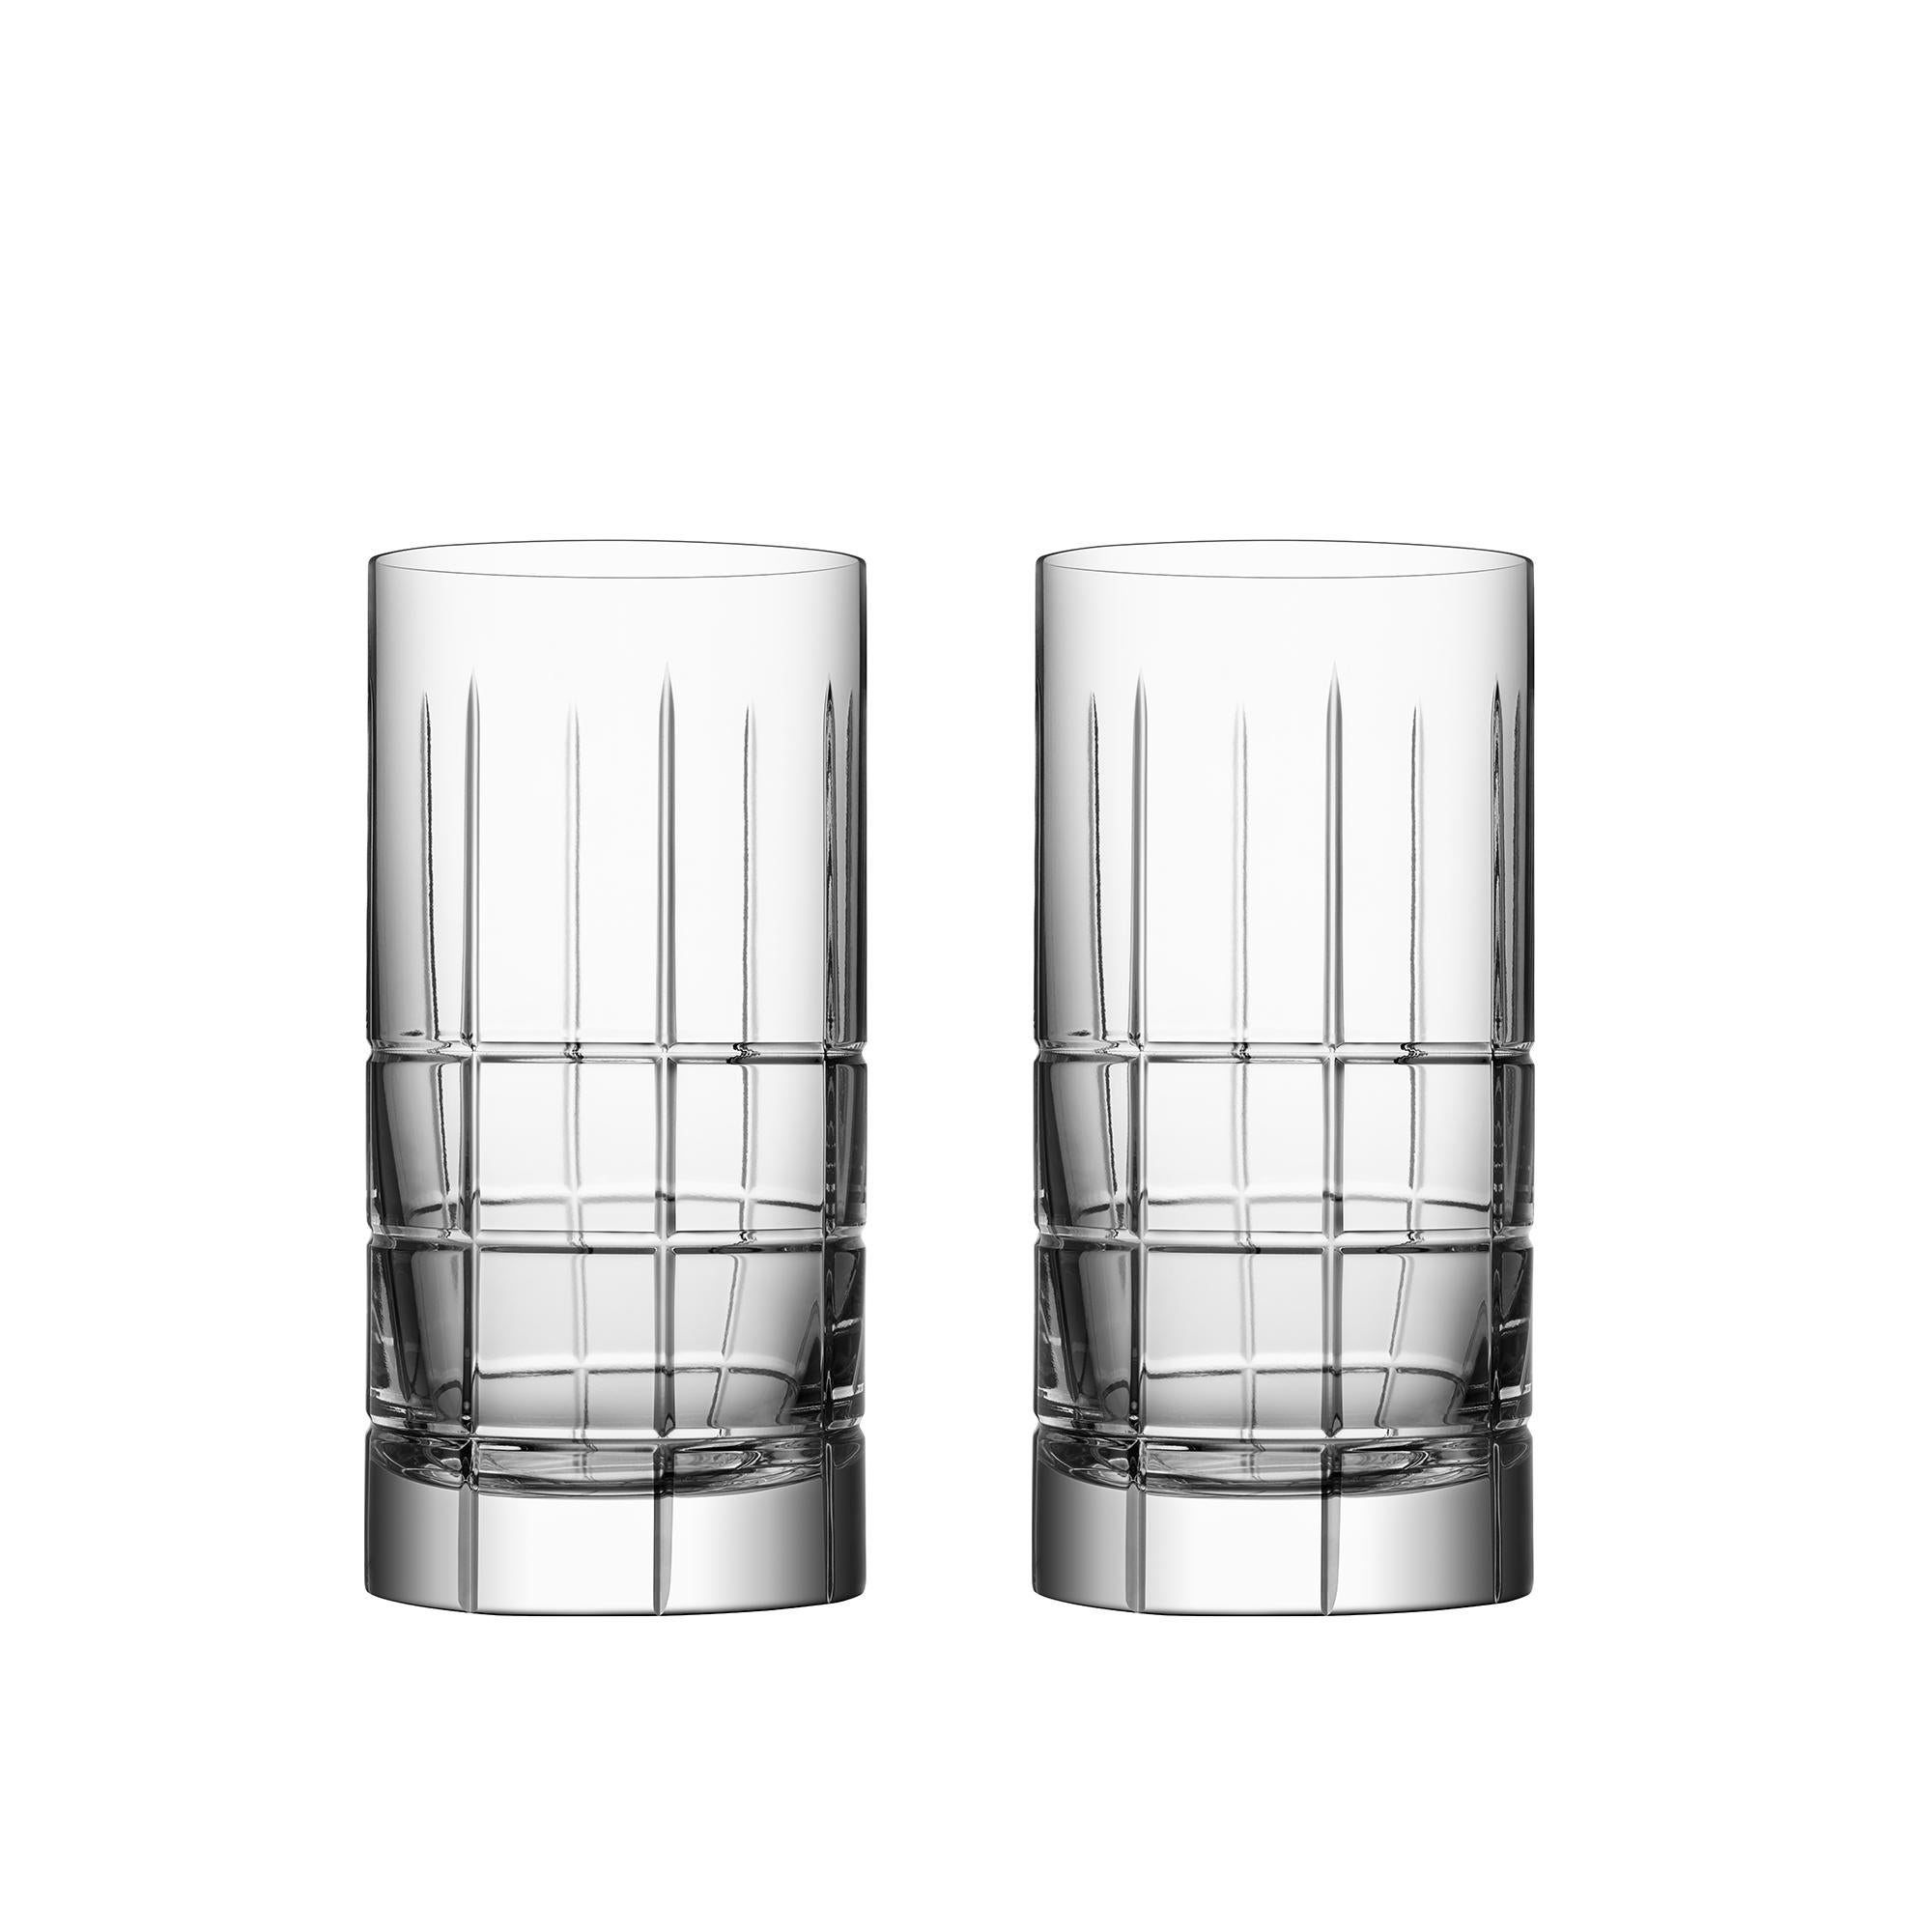 Street Highball from Orrefors, which holds 15 oz, is ideal for serving long drinks. The highball glass has a checked motif of straight lines inspired by the criss-cross streets and avenues of Manhattan, New York. Designed by Jan Johansson.
